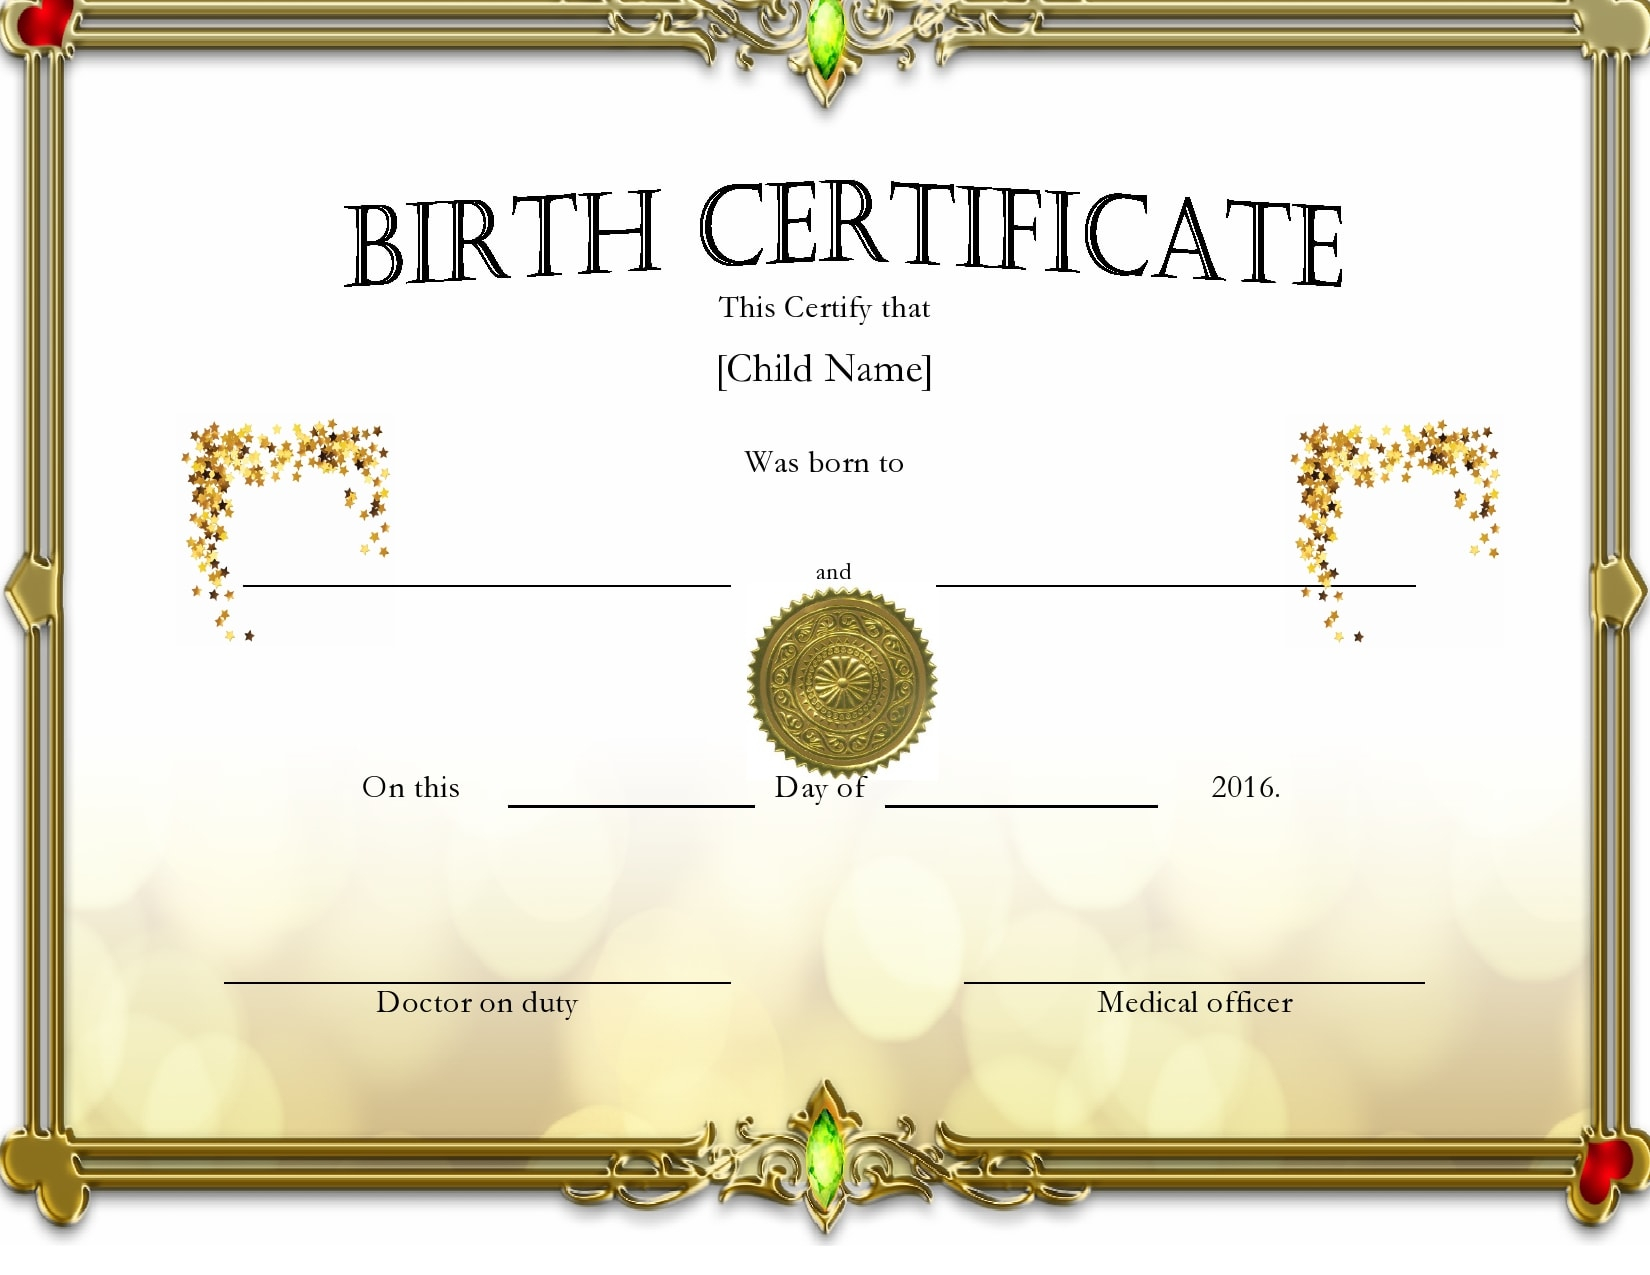 10 Blank Birth Certificate Templates (& Examples) - PrintableTemplates Regarding Birth Certificate Template Uk